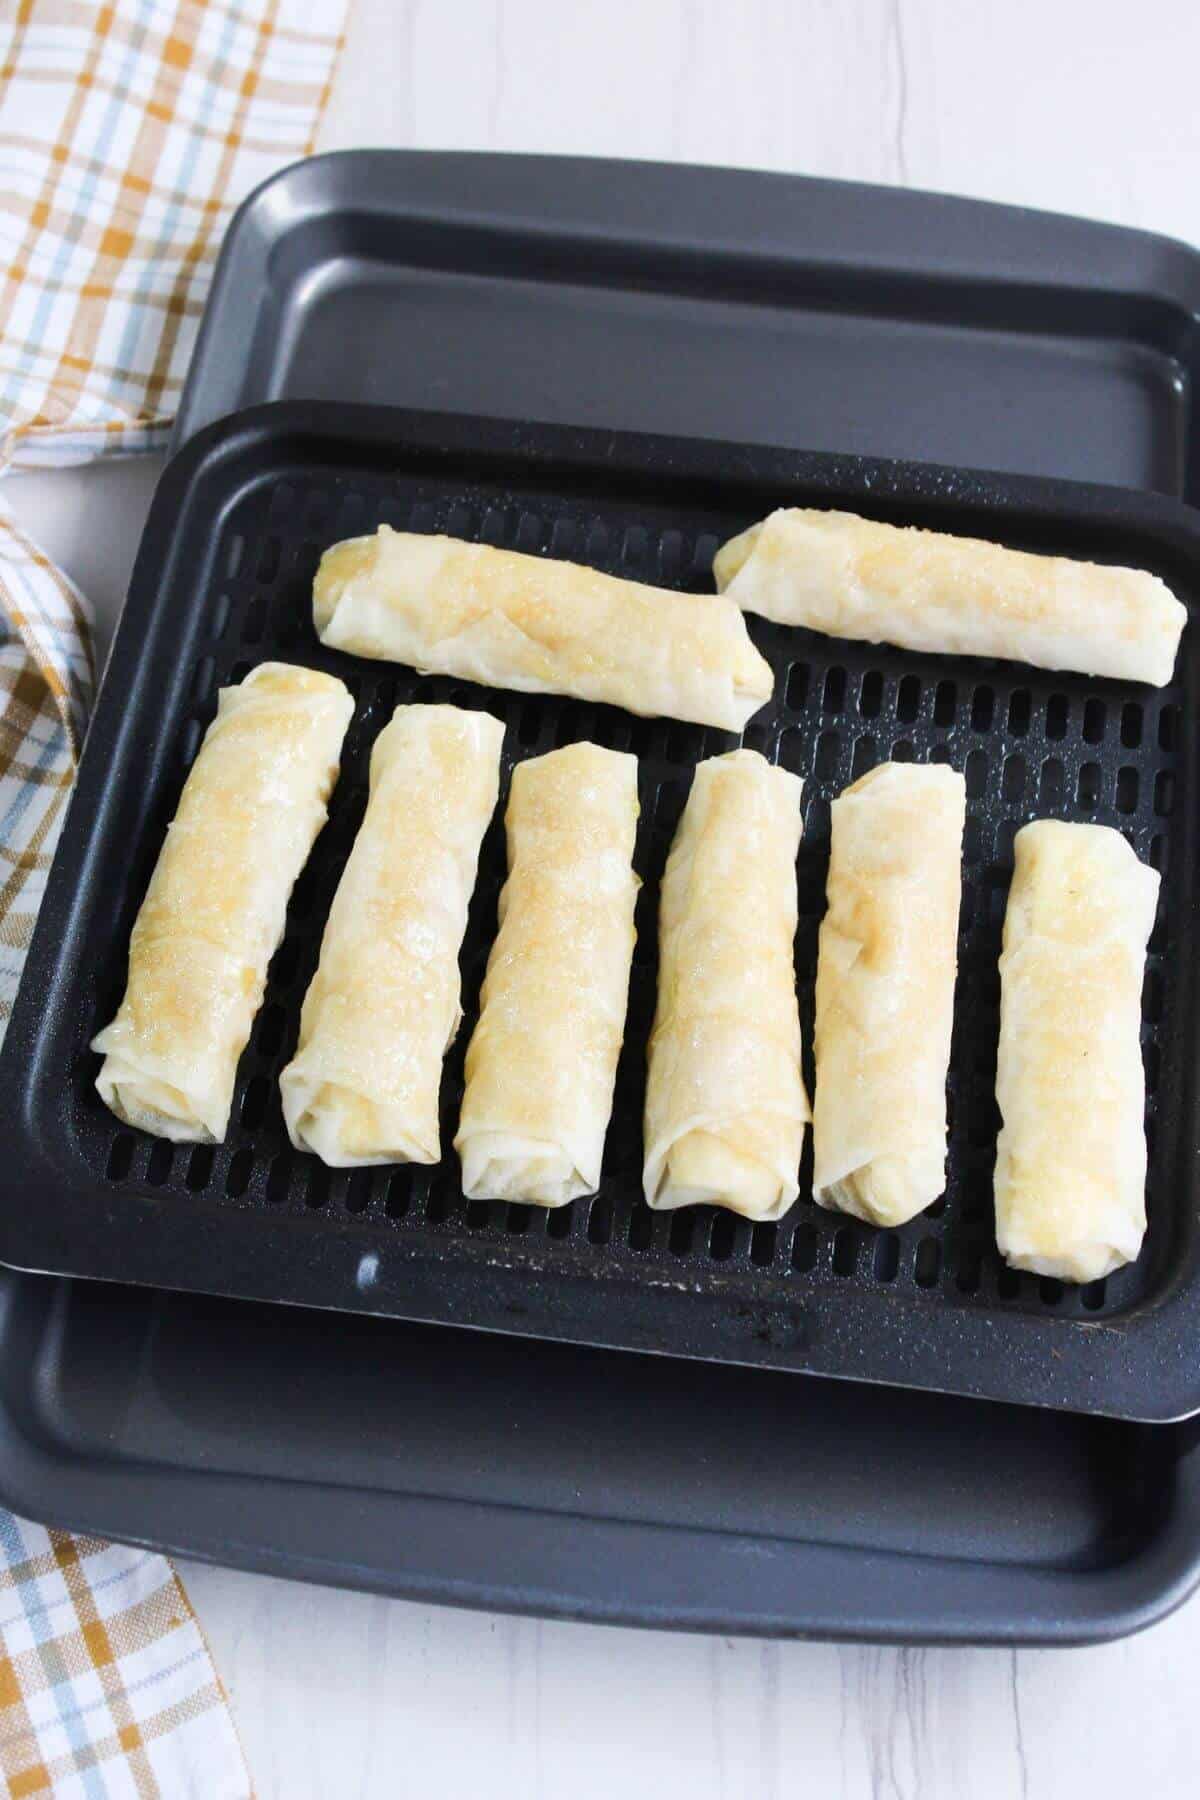 Airfryer baking tray with rolls of banana turon on it.